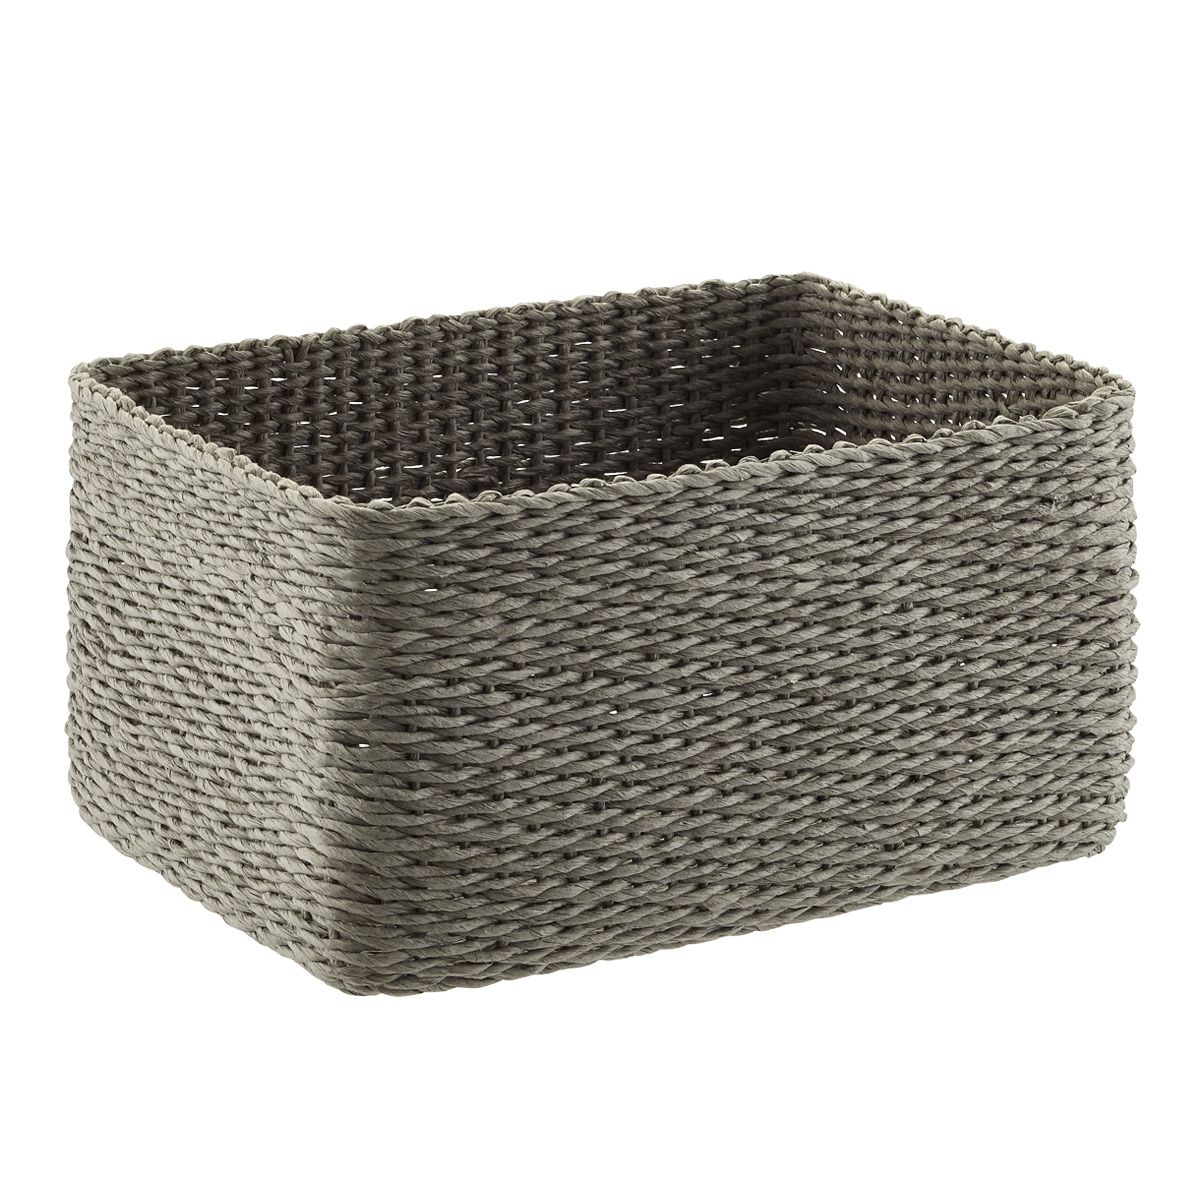 Woven Paper Bin Grey | The Container Store